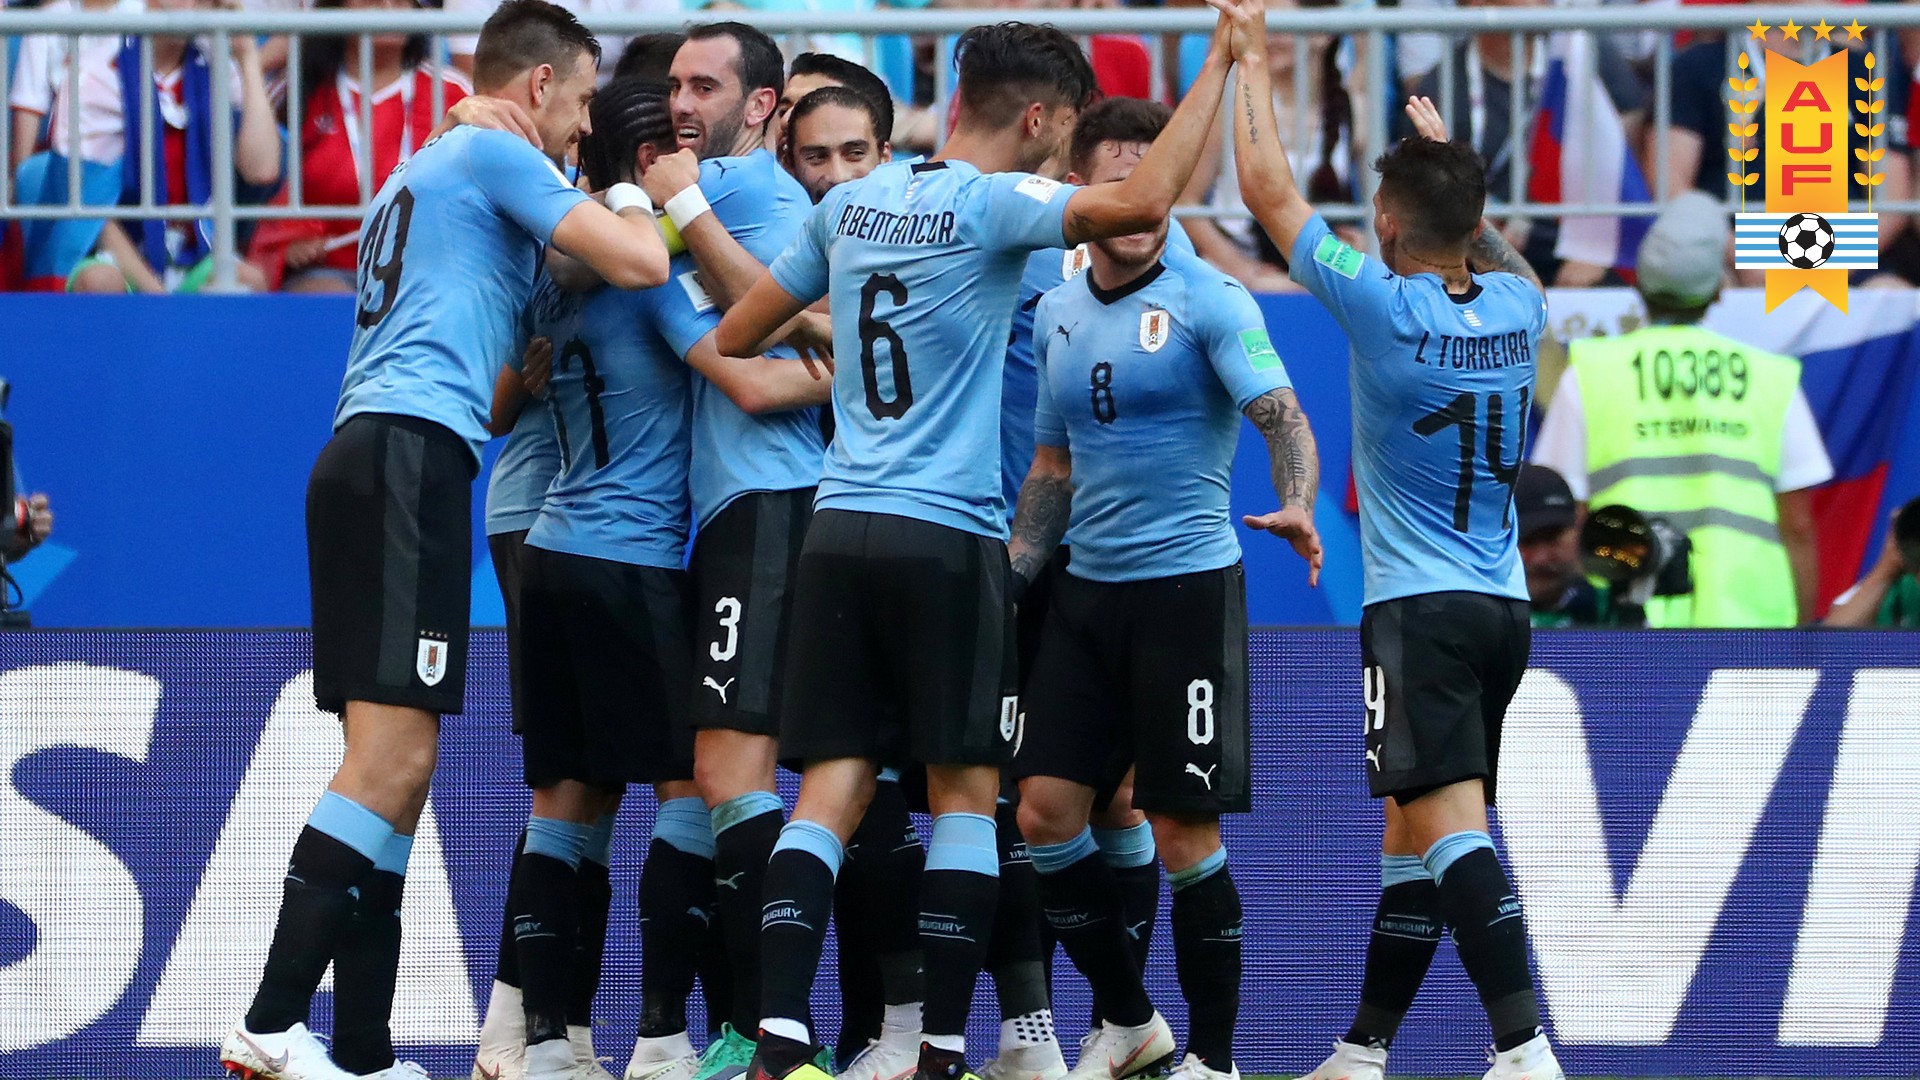 Uruguay World Cup Squad Wallpaper With Resolution 1920X1080 pixel. You can make this wallpaper for your Mac or Windows Desktop Background, iPhone, Android or Tablet and another Smartphone device for free